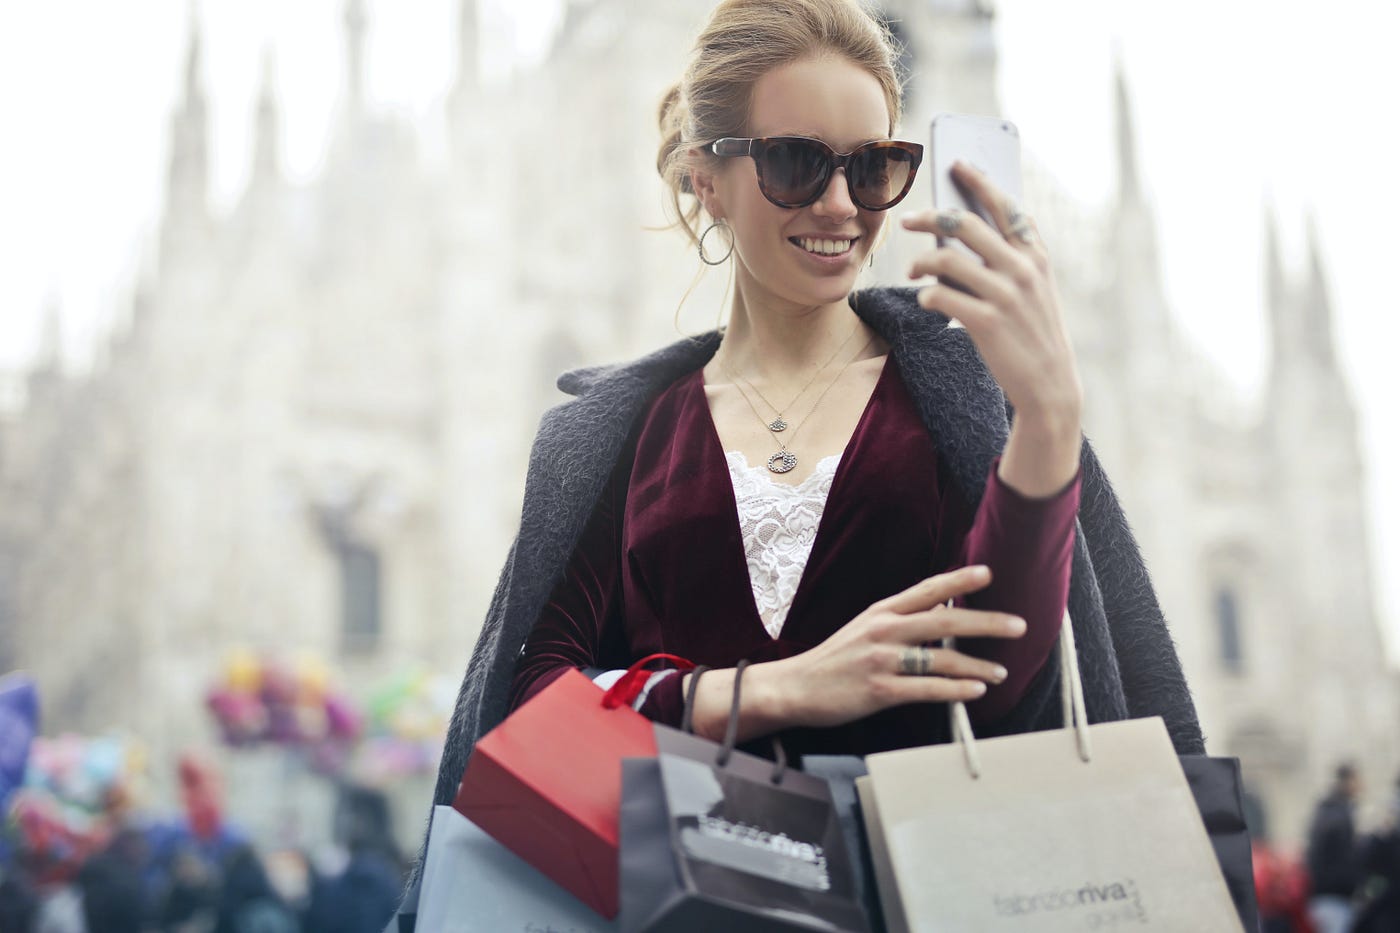 woman wearing sunglasses and holding numerous shopping bags taking selfie.